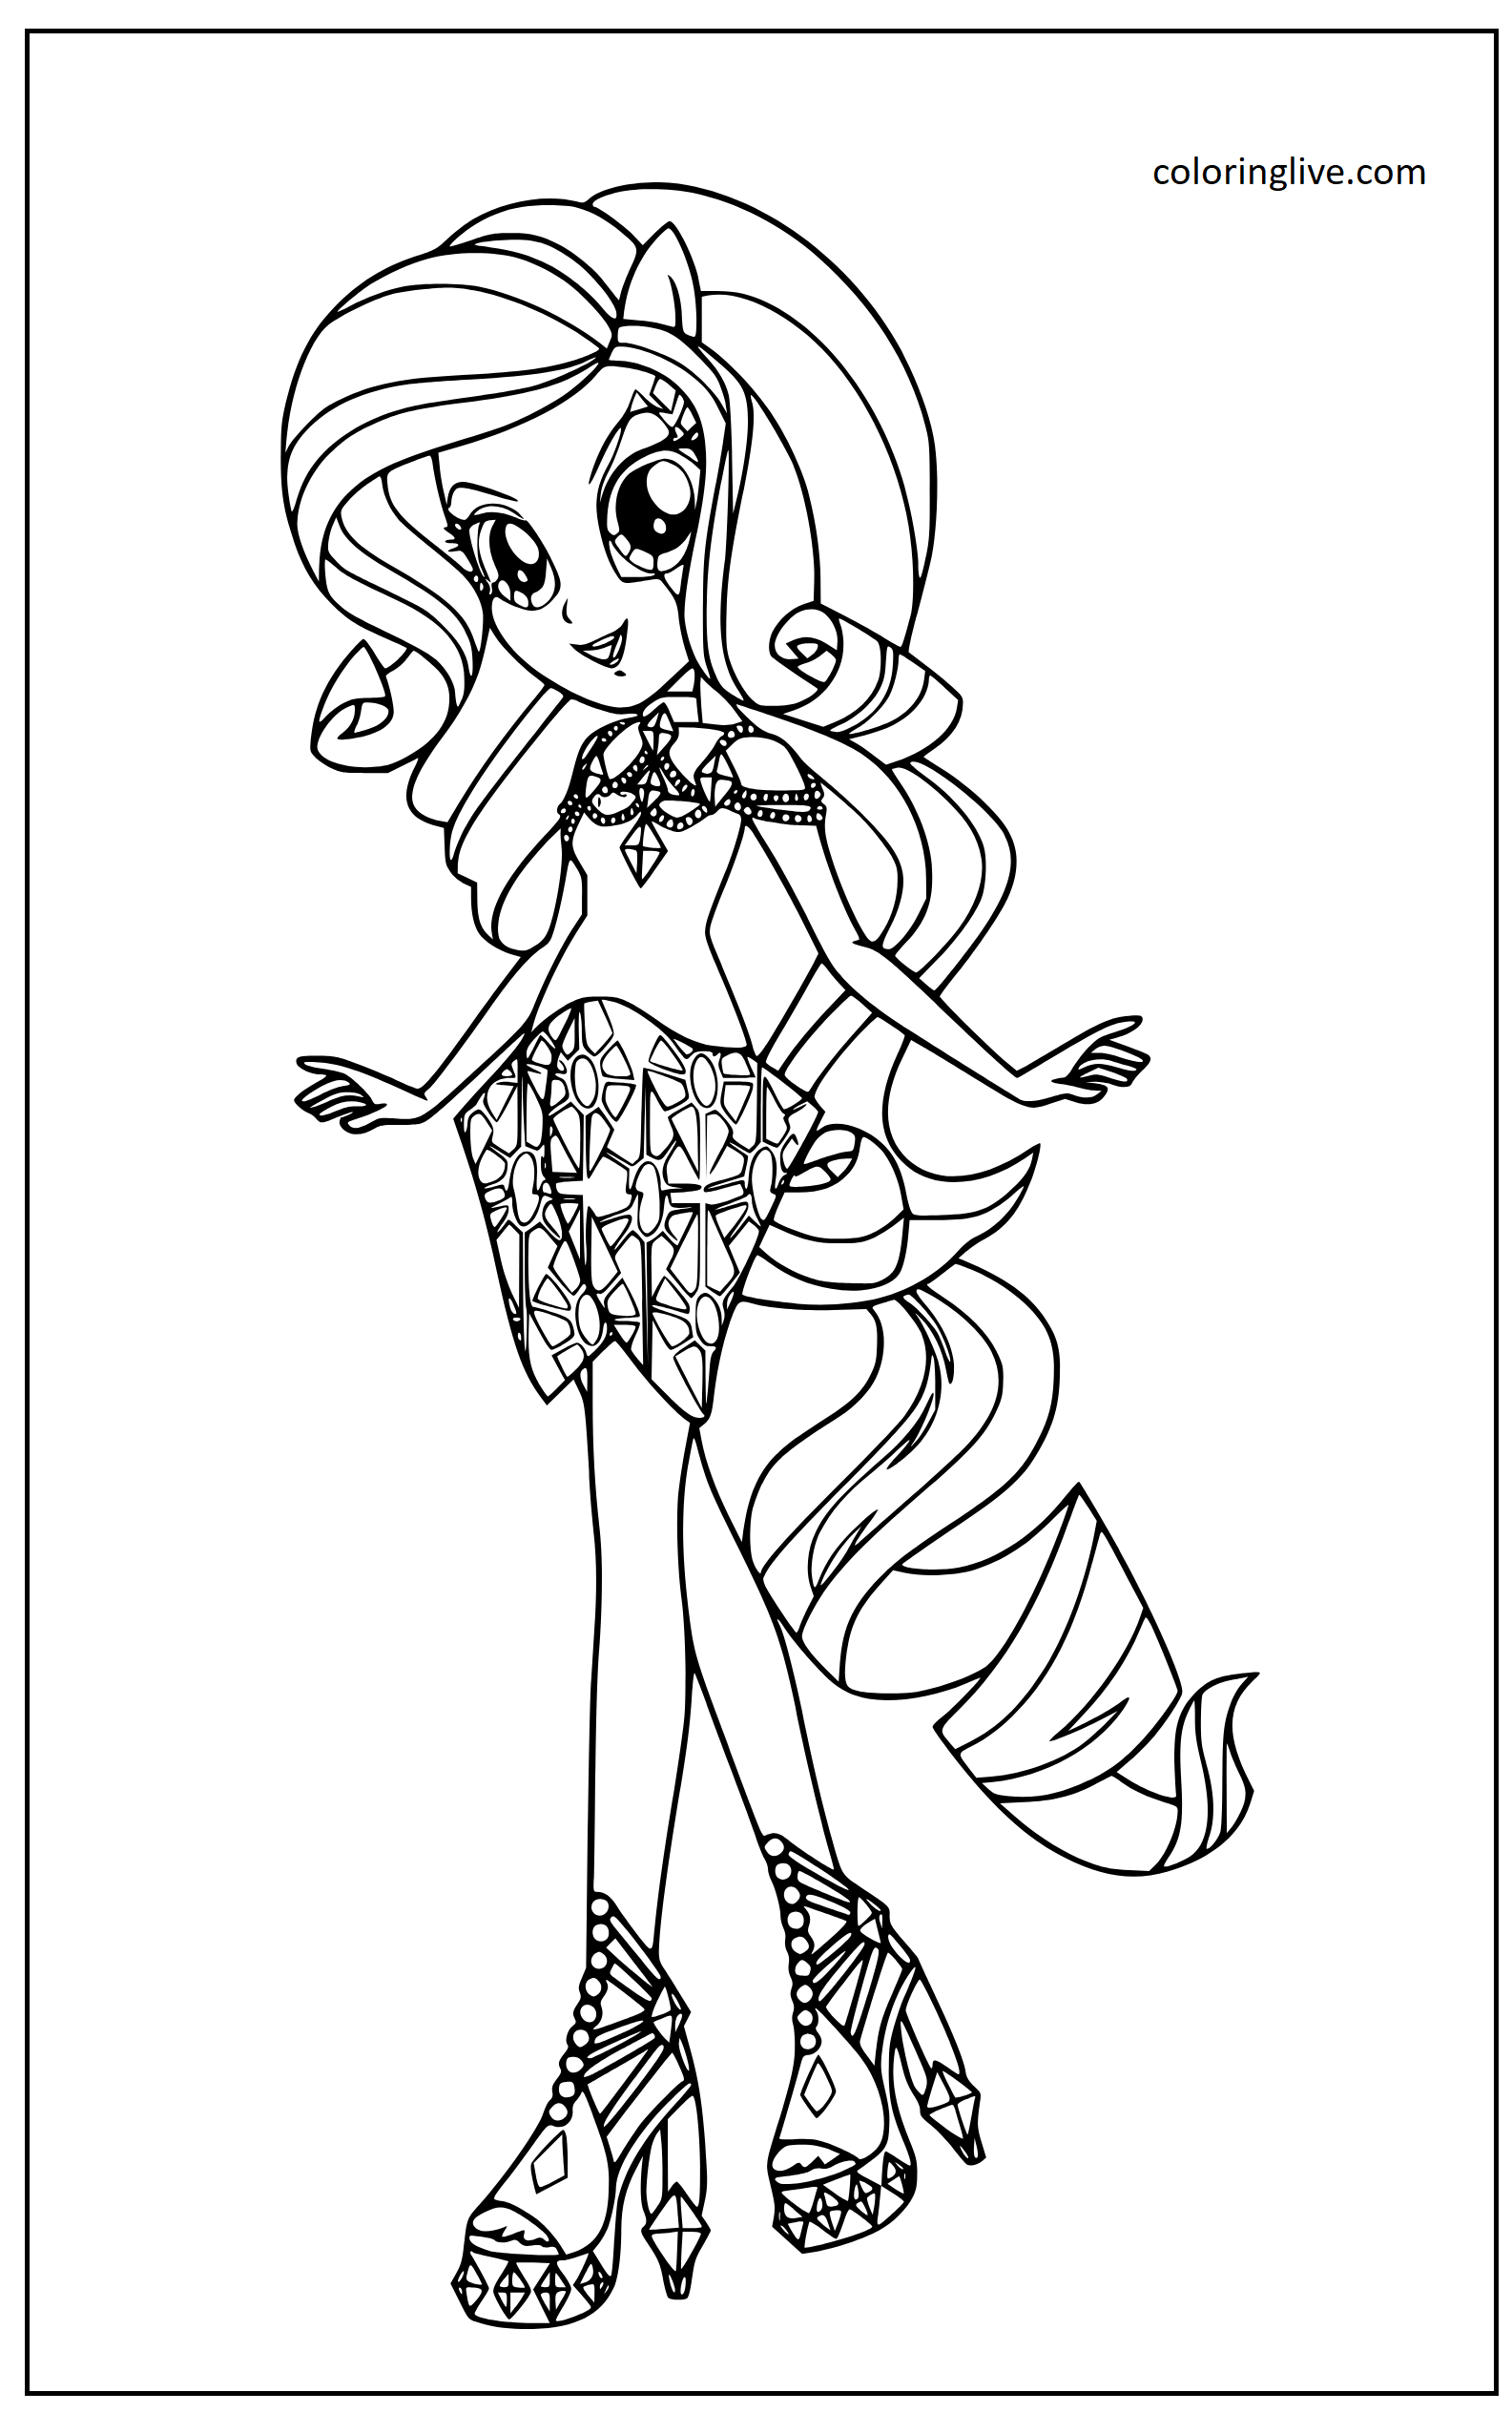 Printable Rarity of MLP Equestria Coloring Page for kids.